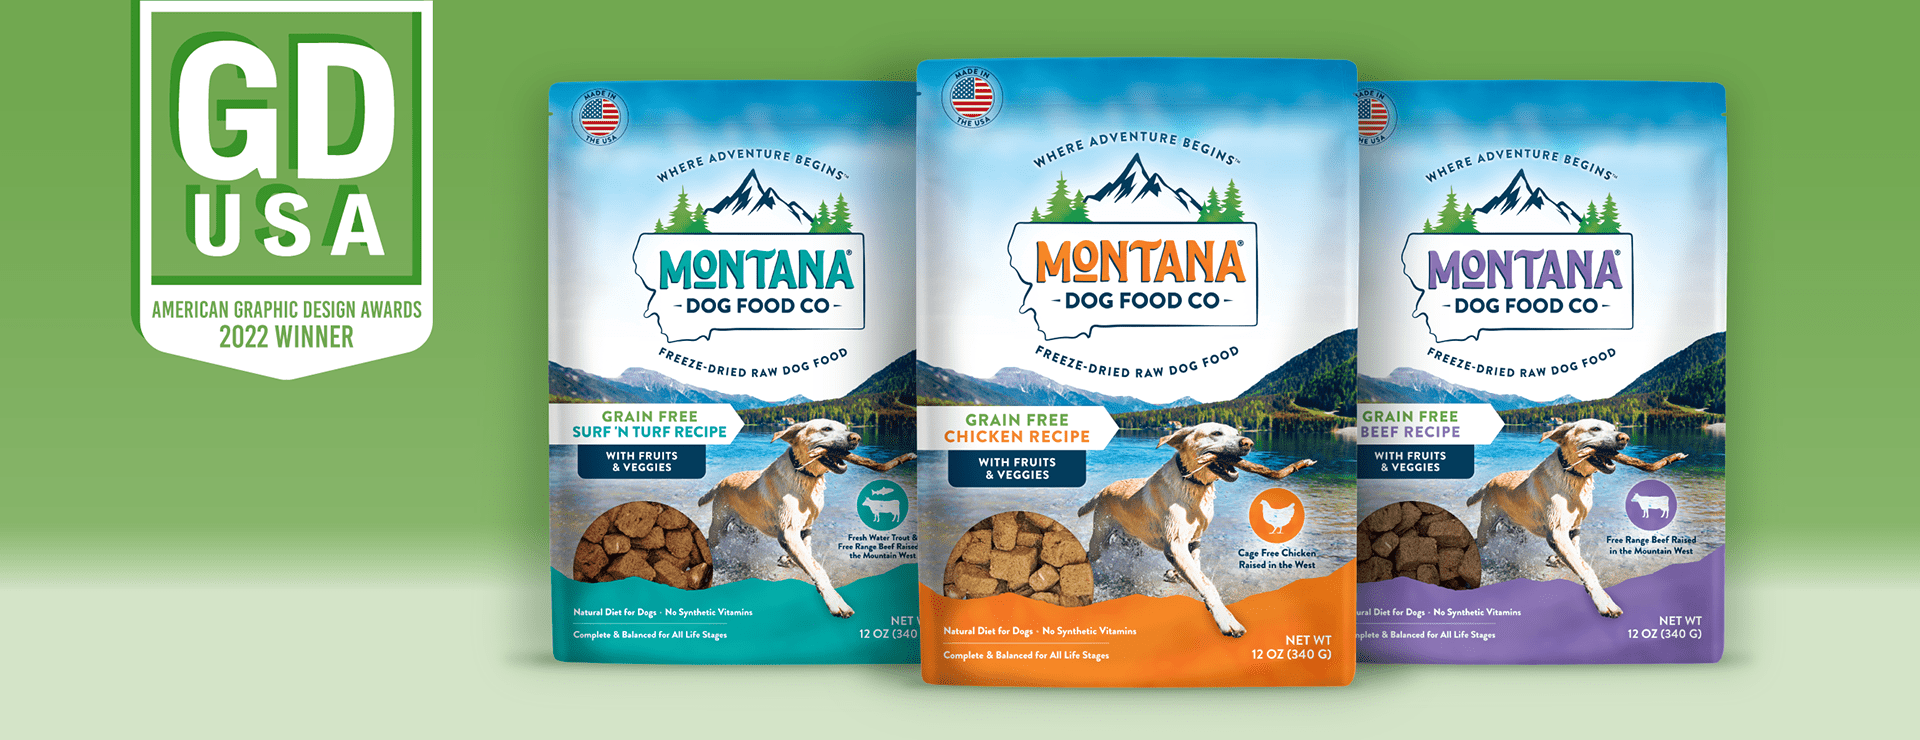 Three redesigned packages of Montana Dog Food Co. Dog Food freeze dried treats. Graphic Design USA 2022 Winner - Matrix Partners.